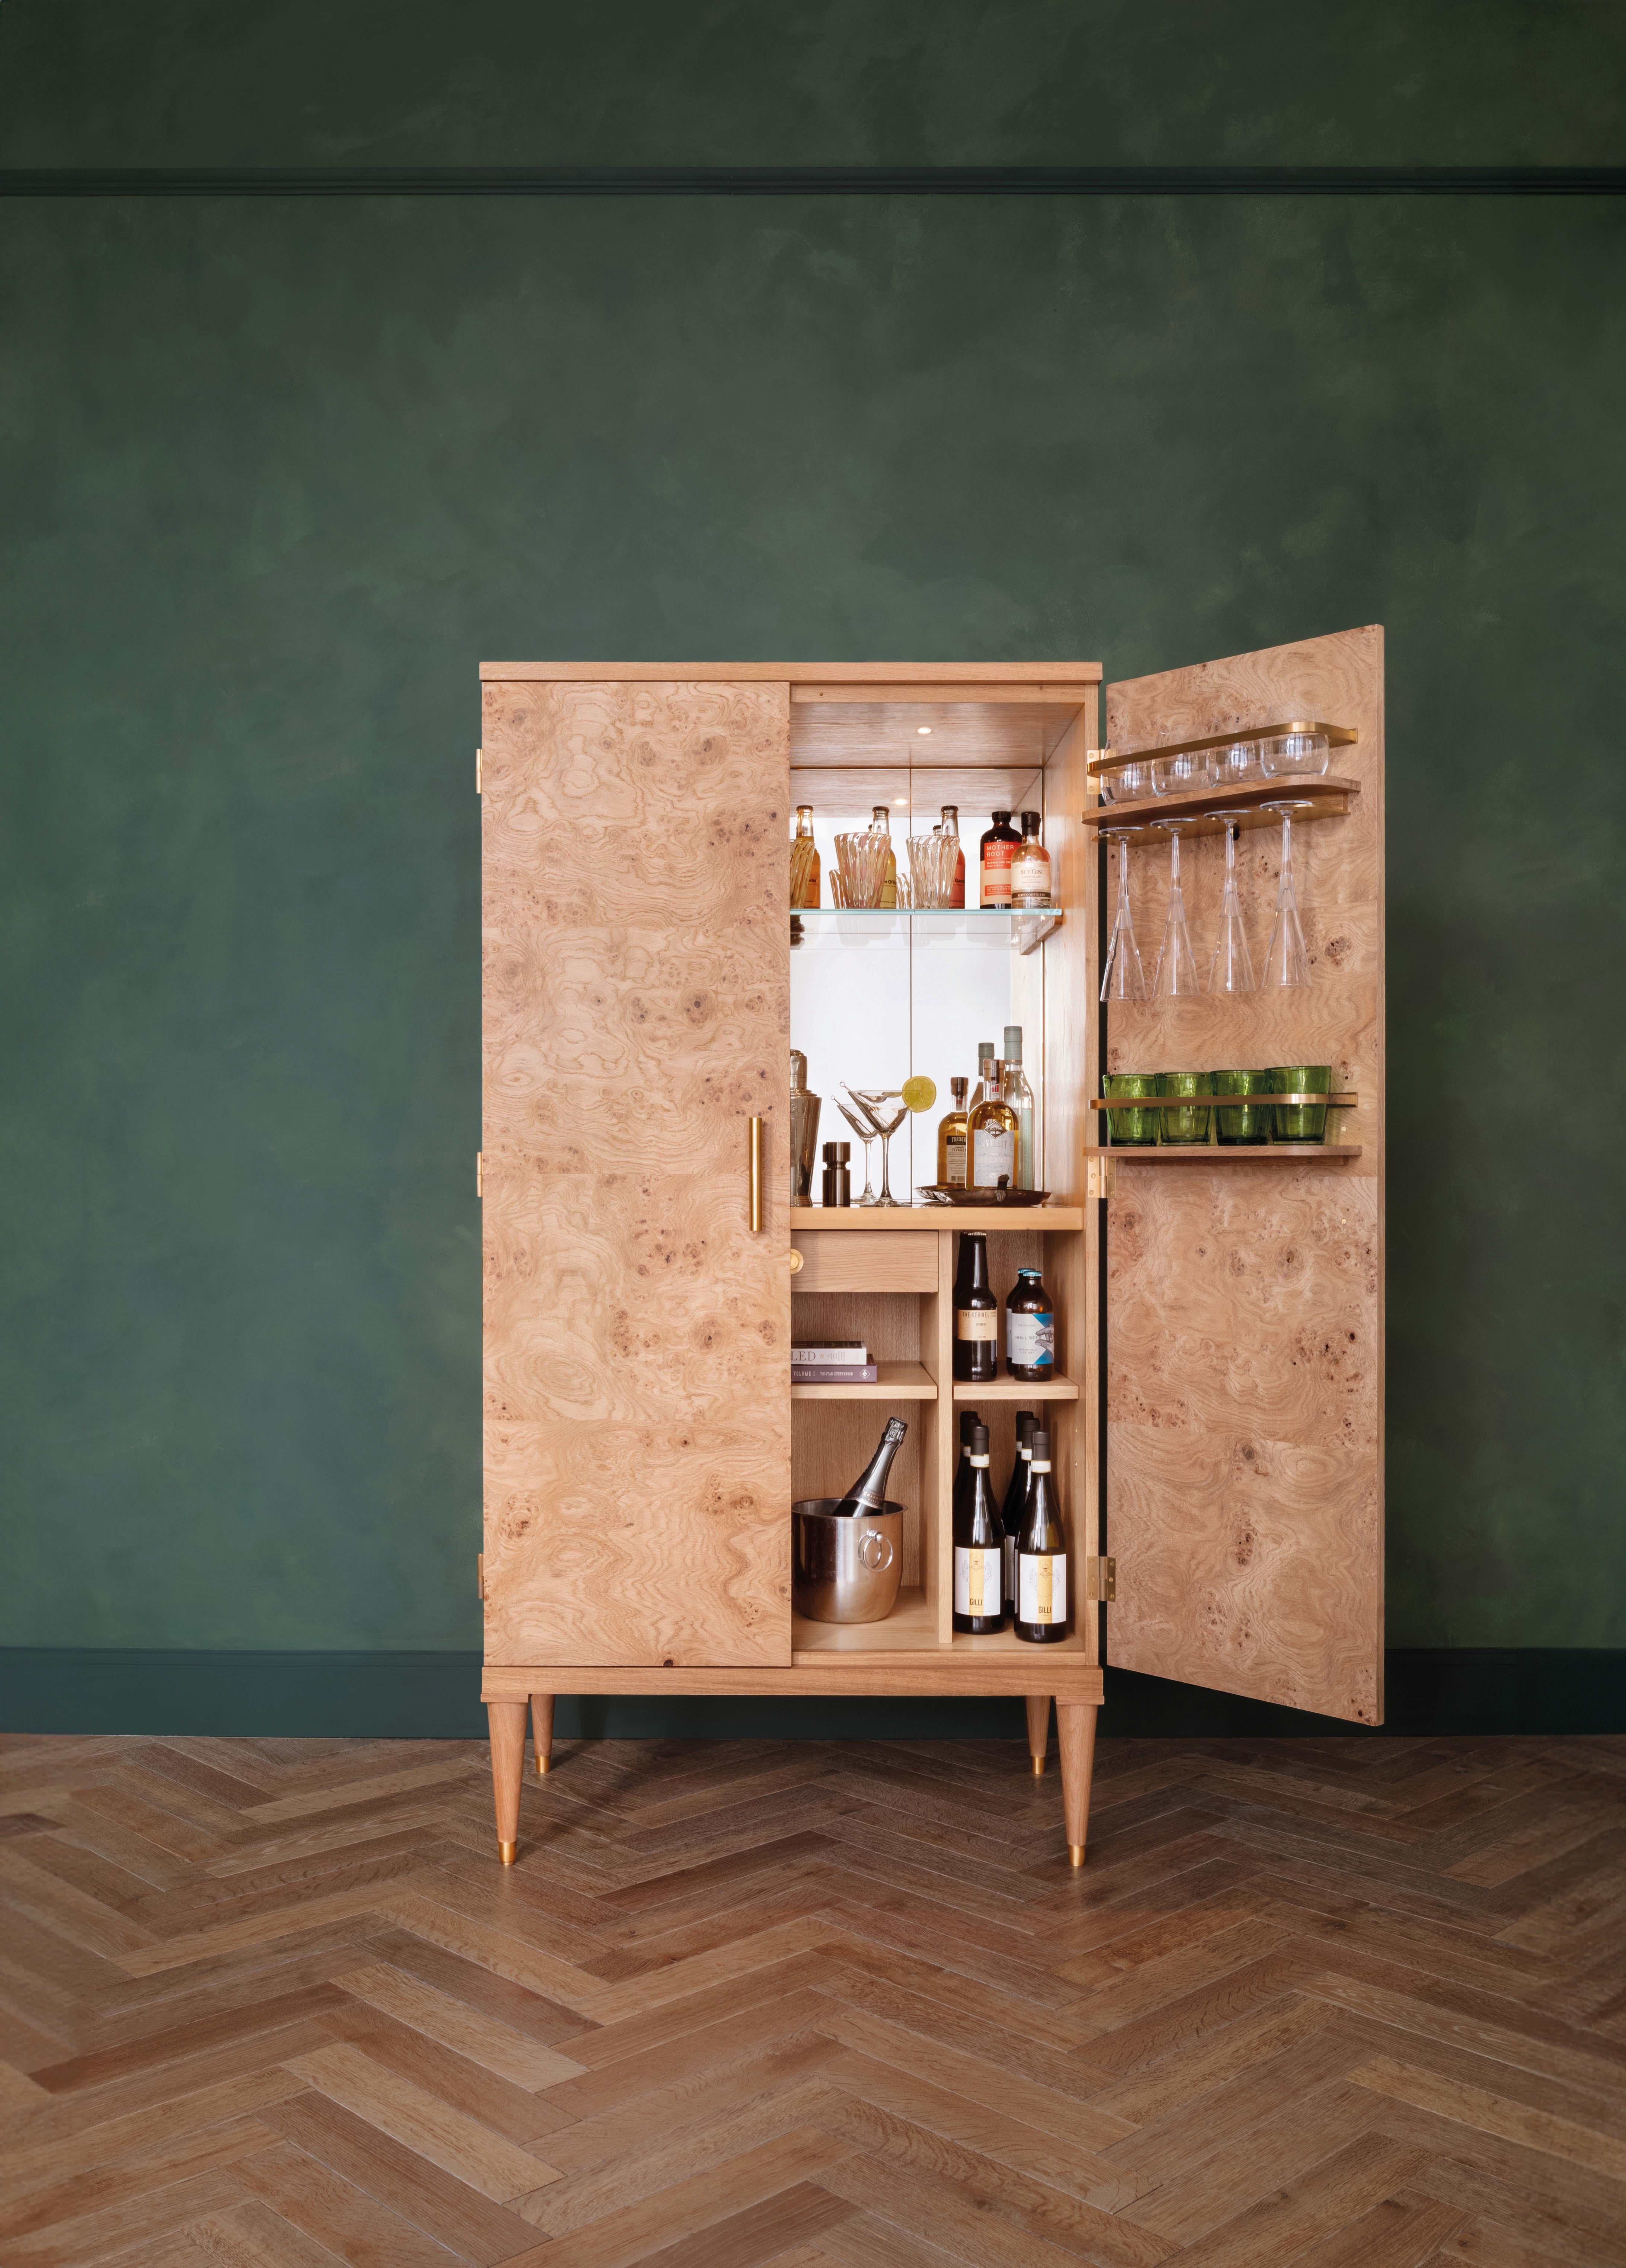 Inspired by nature, our beautiful Burr Oak cocktail cabinet with natural oak carcase, burr oak doors and side panels, antiqued brass trim, mirror glass back panel and a black glass countertop.

Available to view in our London Showroom.